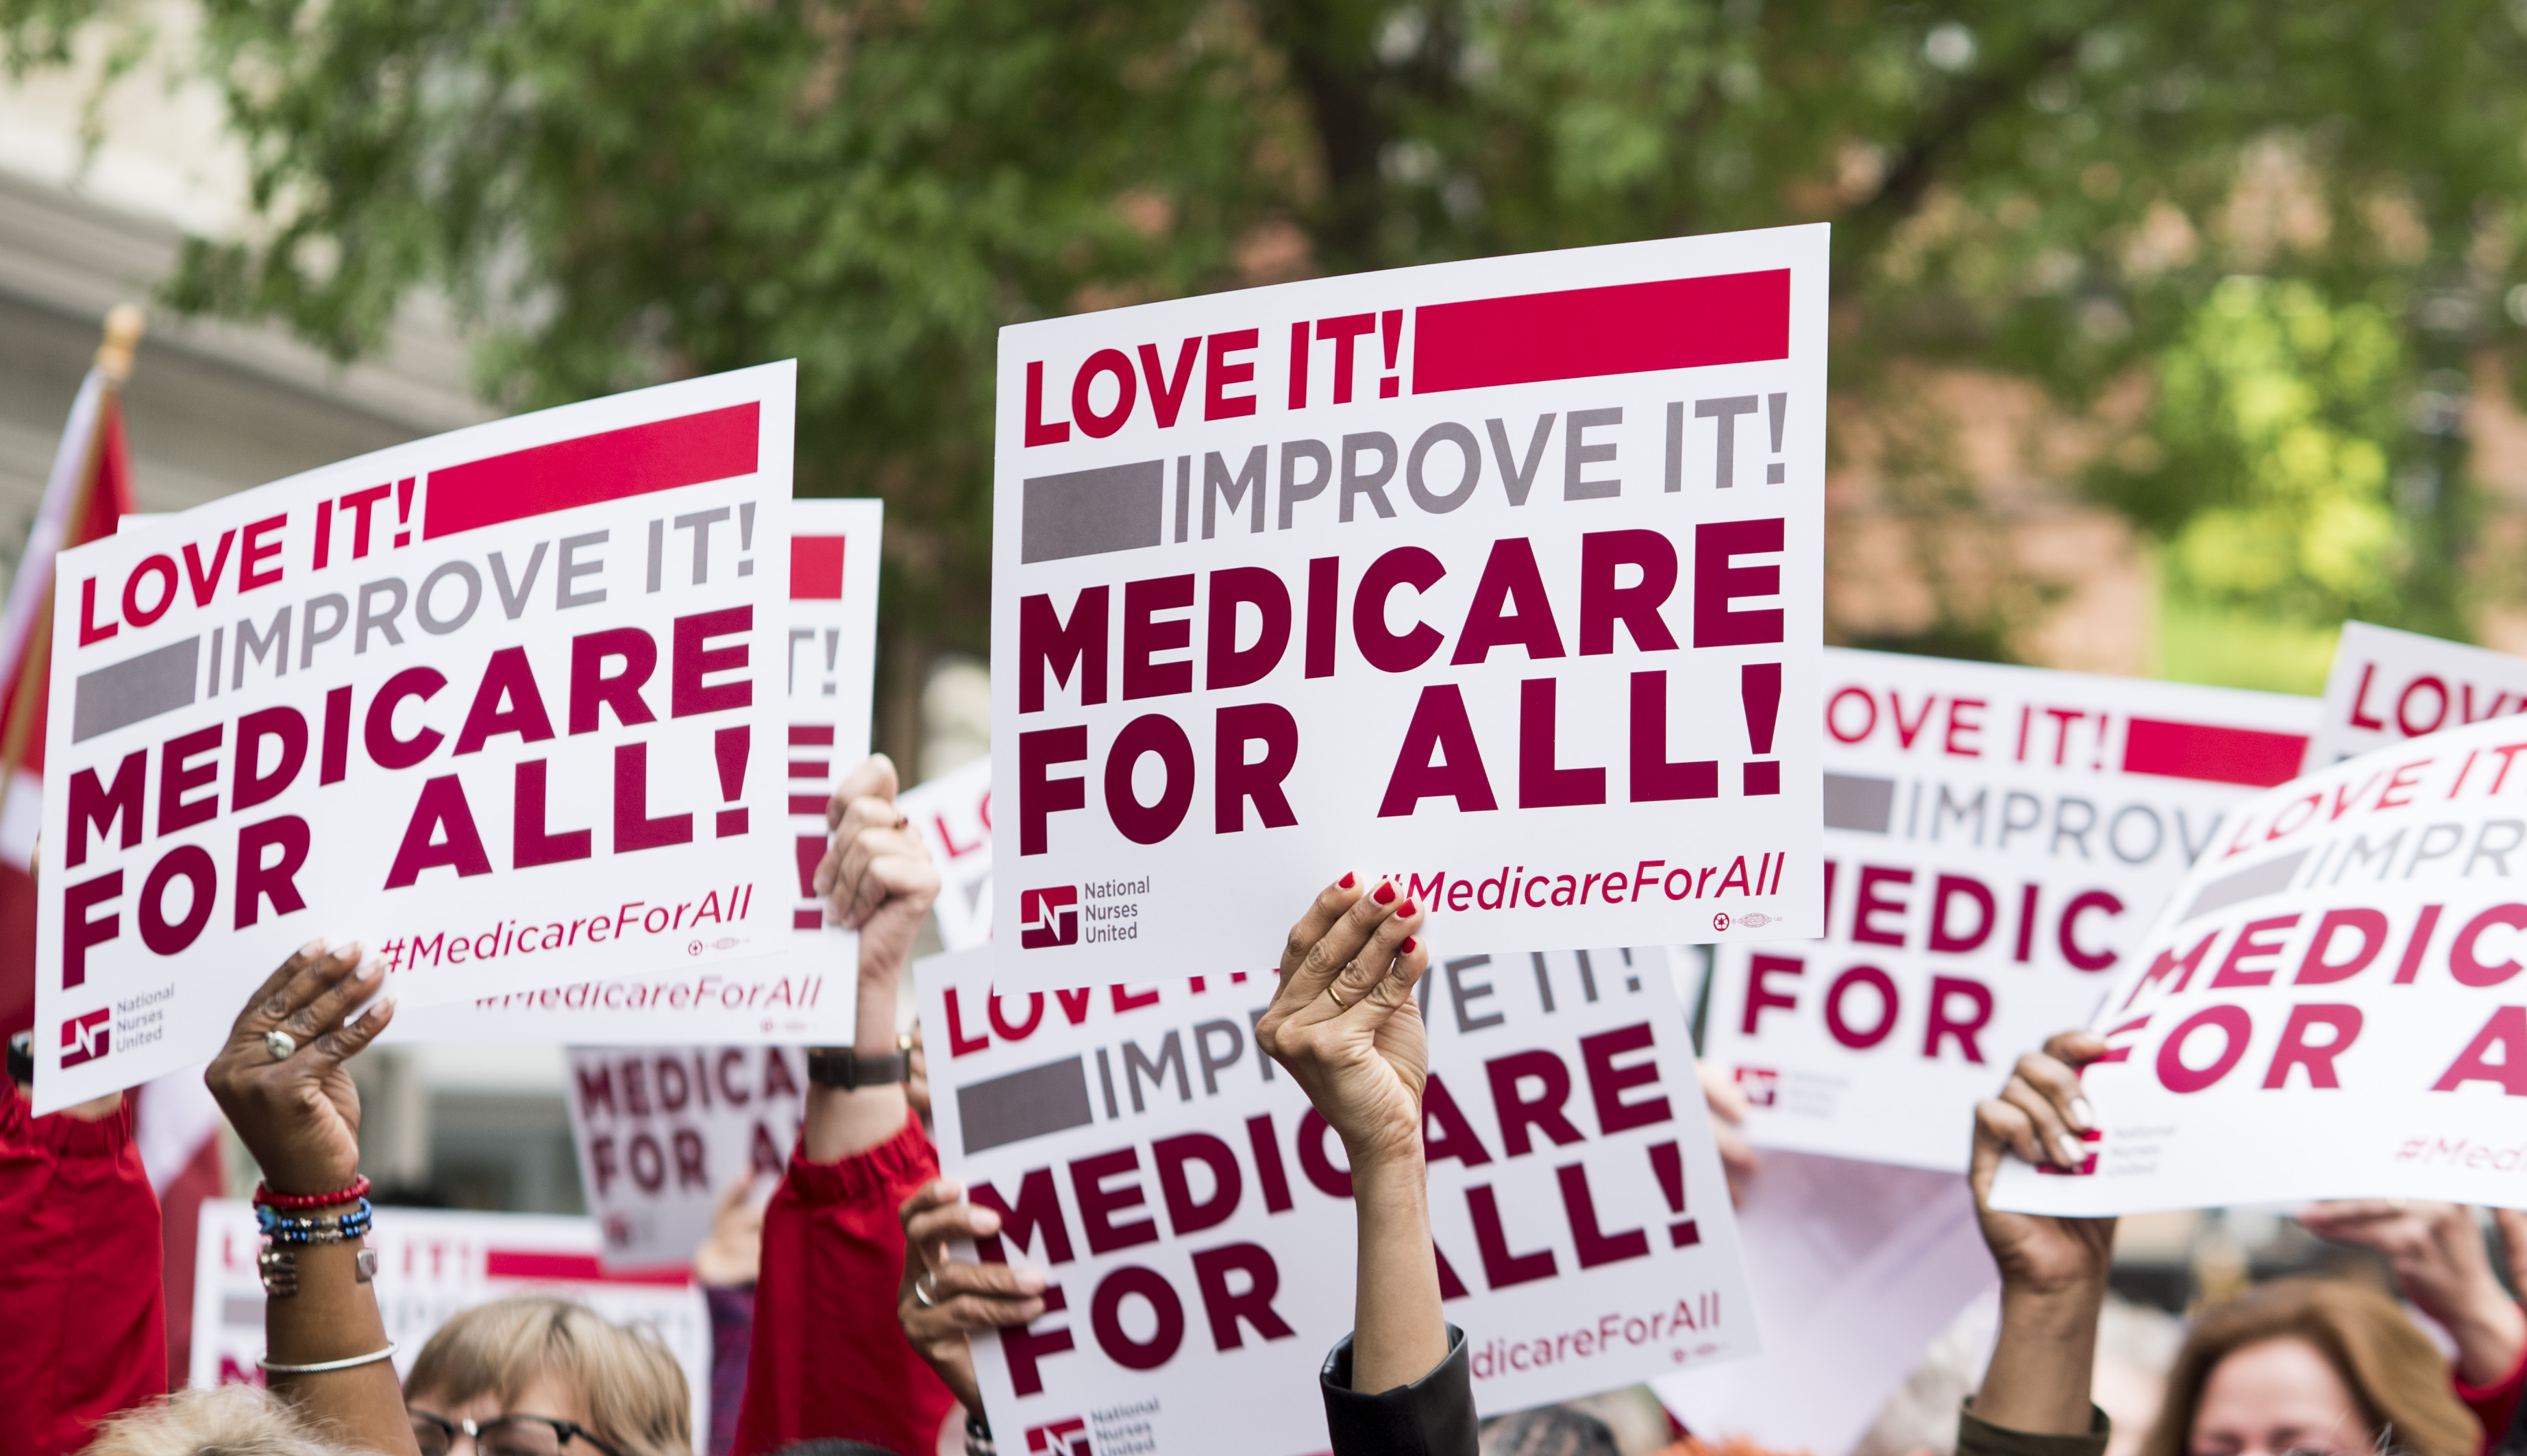 Members of National Nurses United union members wave "Medicare for All" signs during  a rally in front of the Pharmaceutical Research and Manufacturers of America in Washington calling for "Medicare for All" on Monday, April 29, 2019. (Bill Clark—CQ-Roll Call/Getty Images)